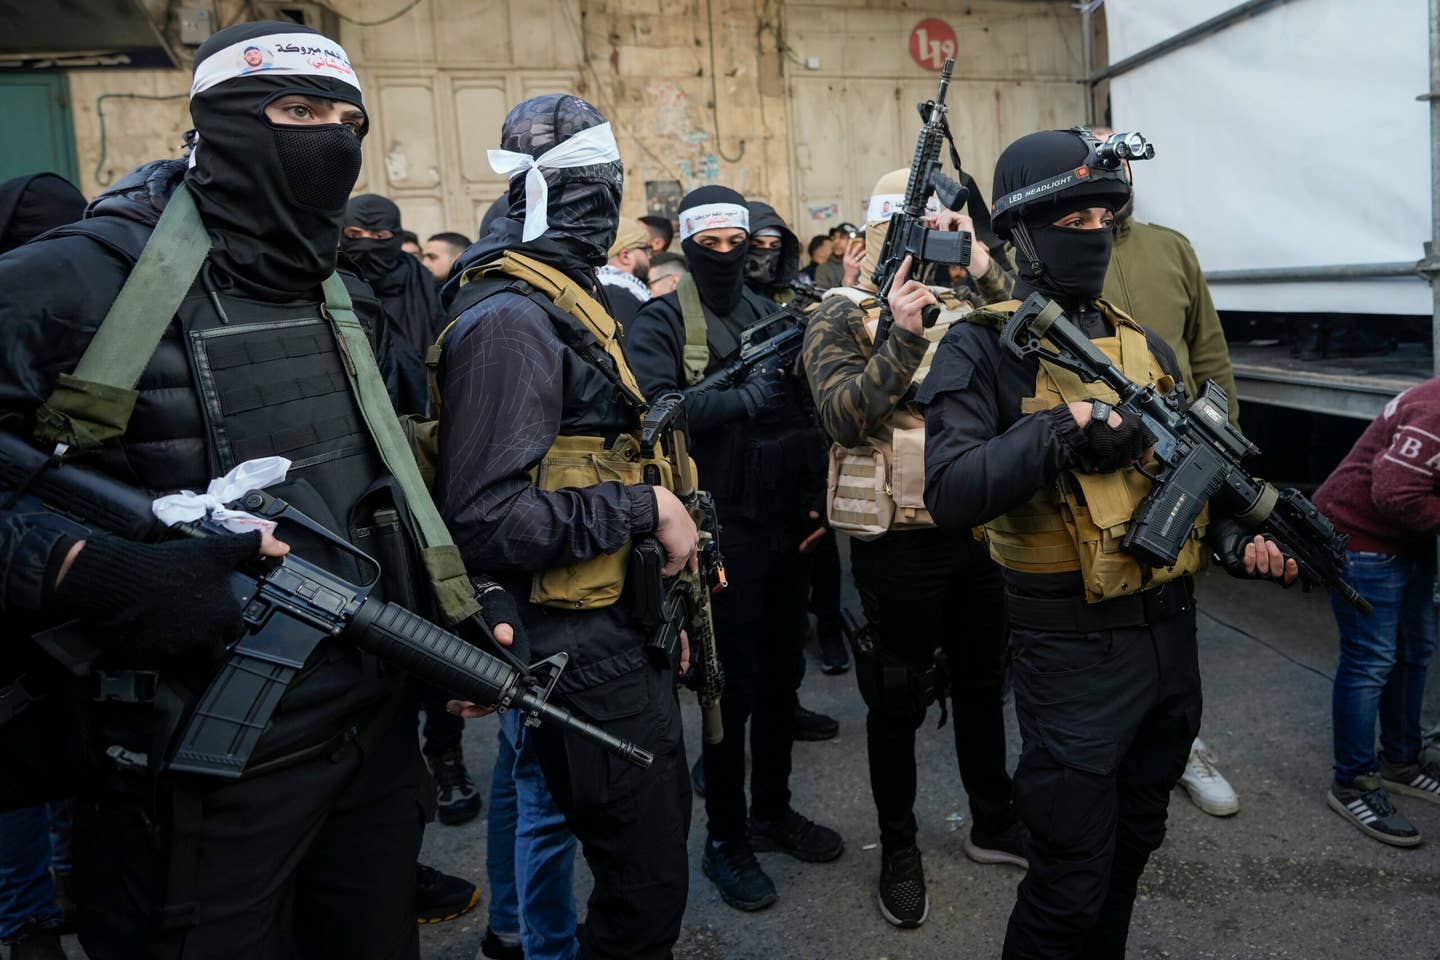 Masked Palestinian gunmen gather in solidarity with Palestinians that were killed in clashes with Israeli troops, in the West Bank city of Nablus, Friday, Feb. 10, 2023. <em>Credit: AP Photo/Majdi Mohammed</em>